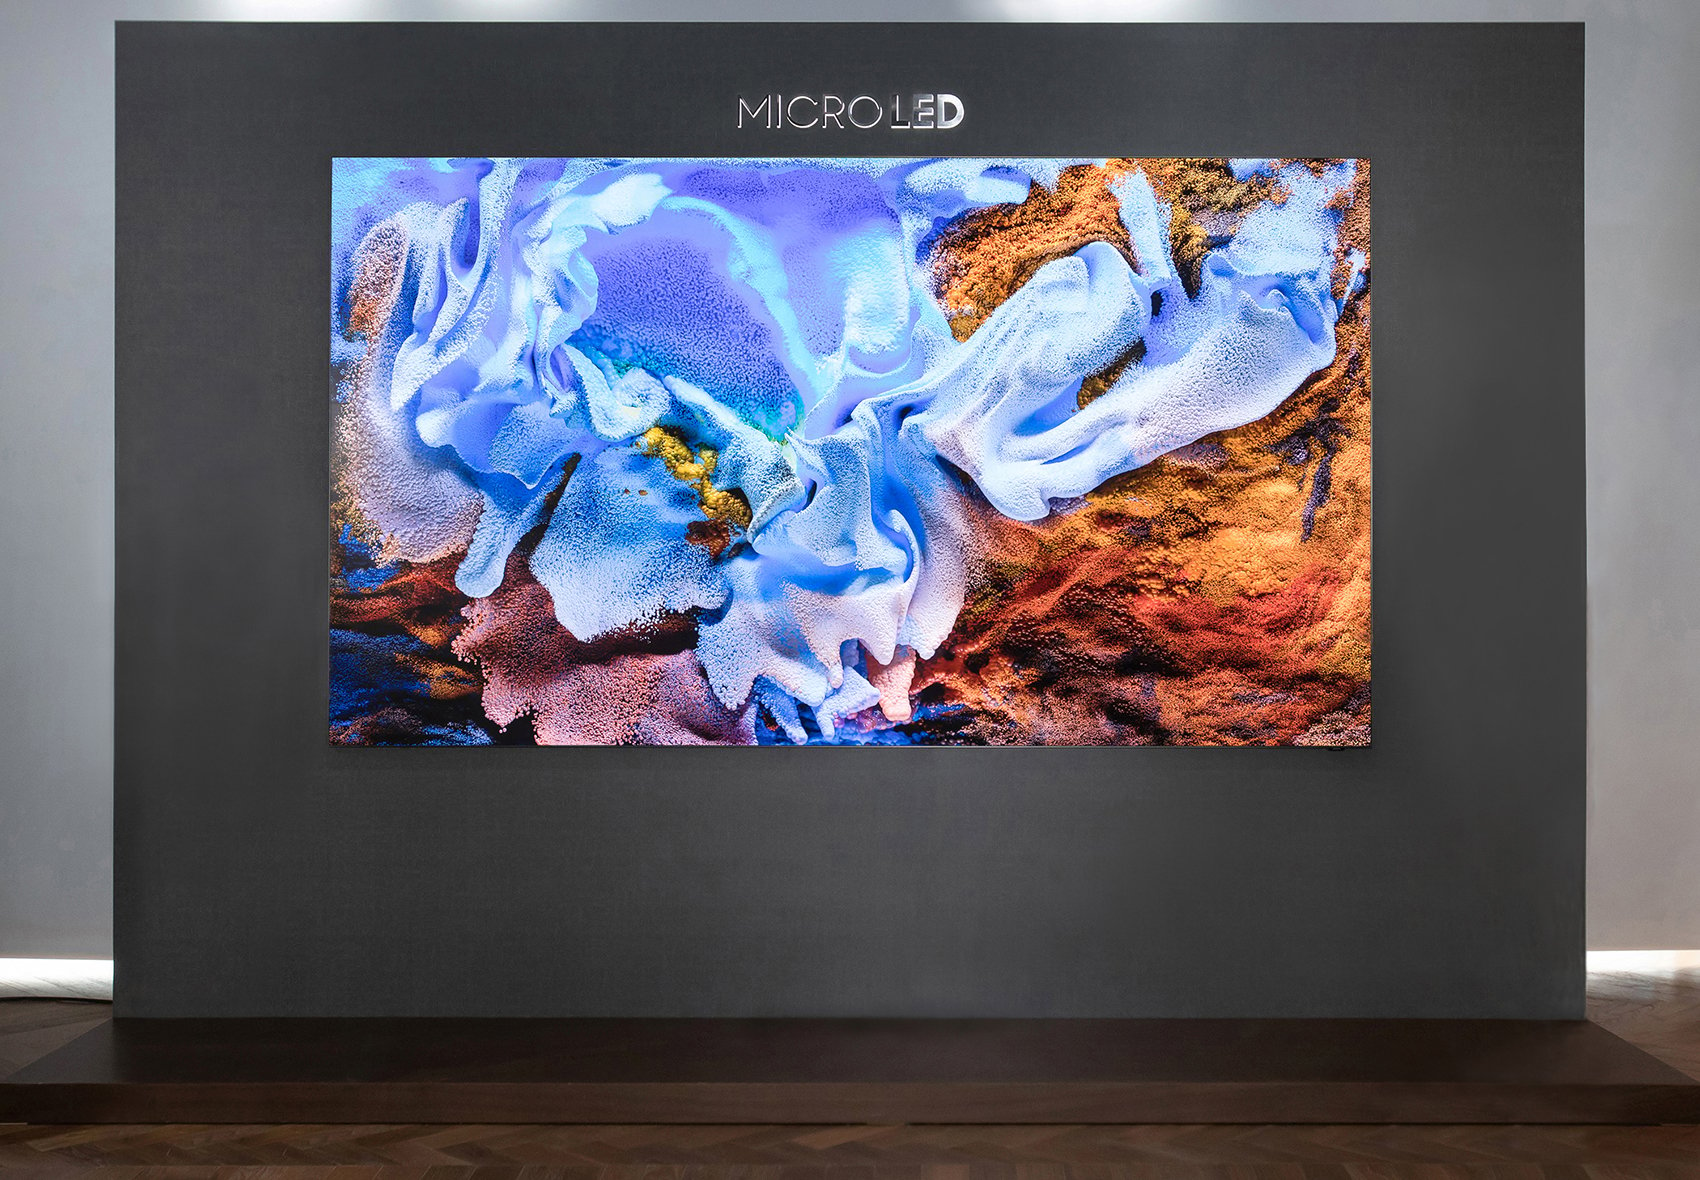 Samsung MicroLED DL1 Samsung Brings MicroLED To Consumer TVs